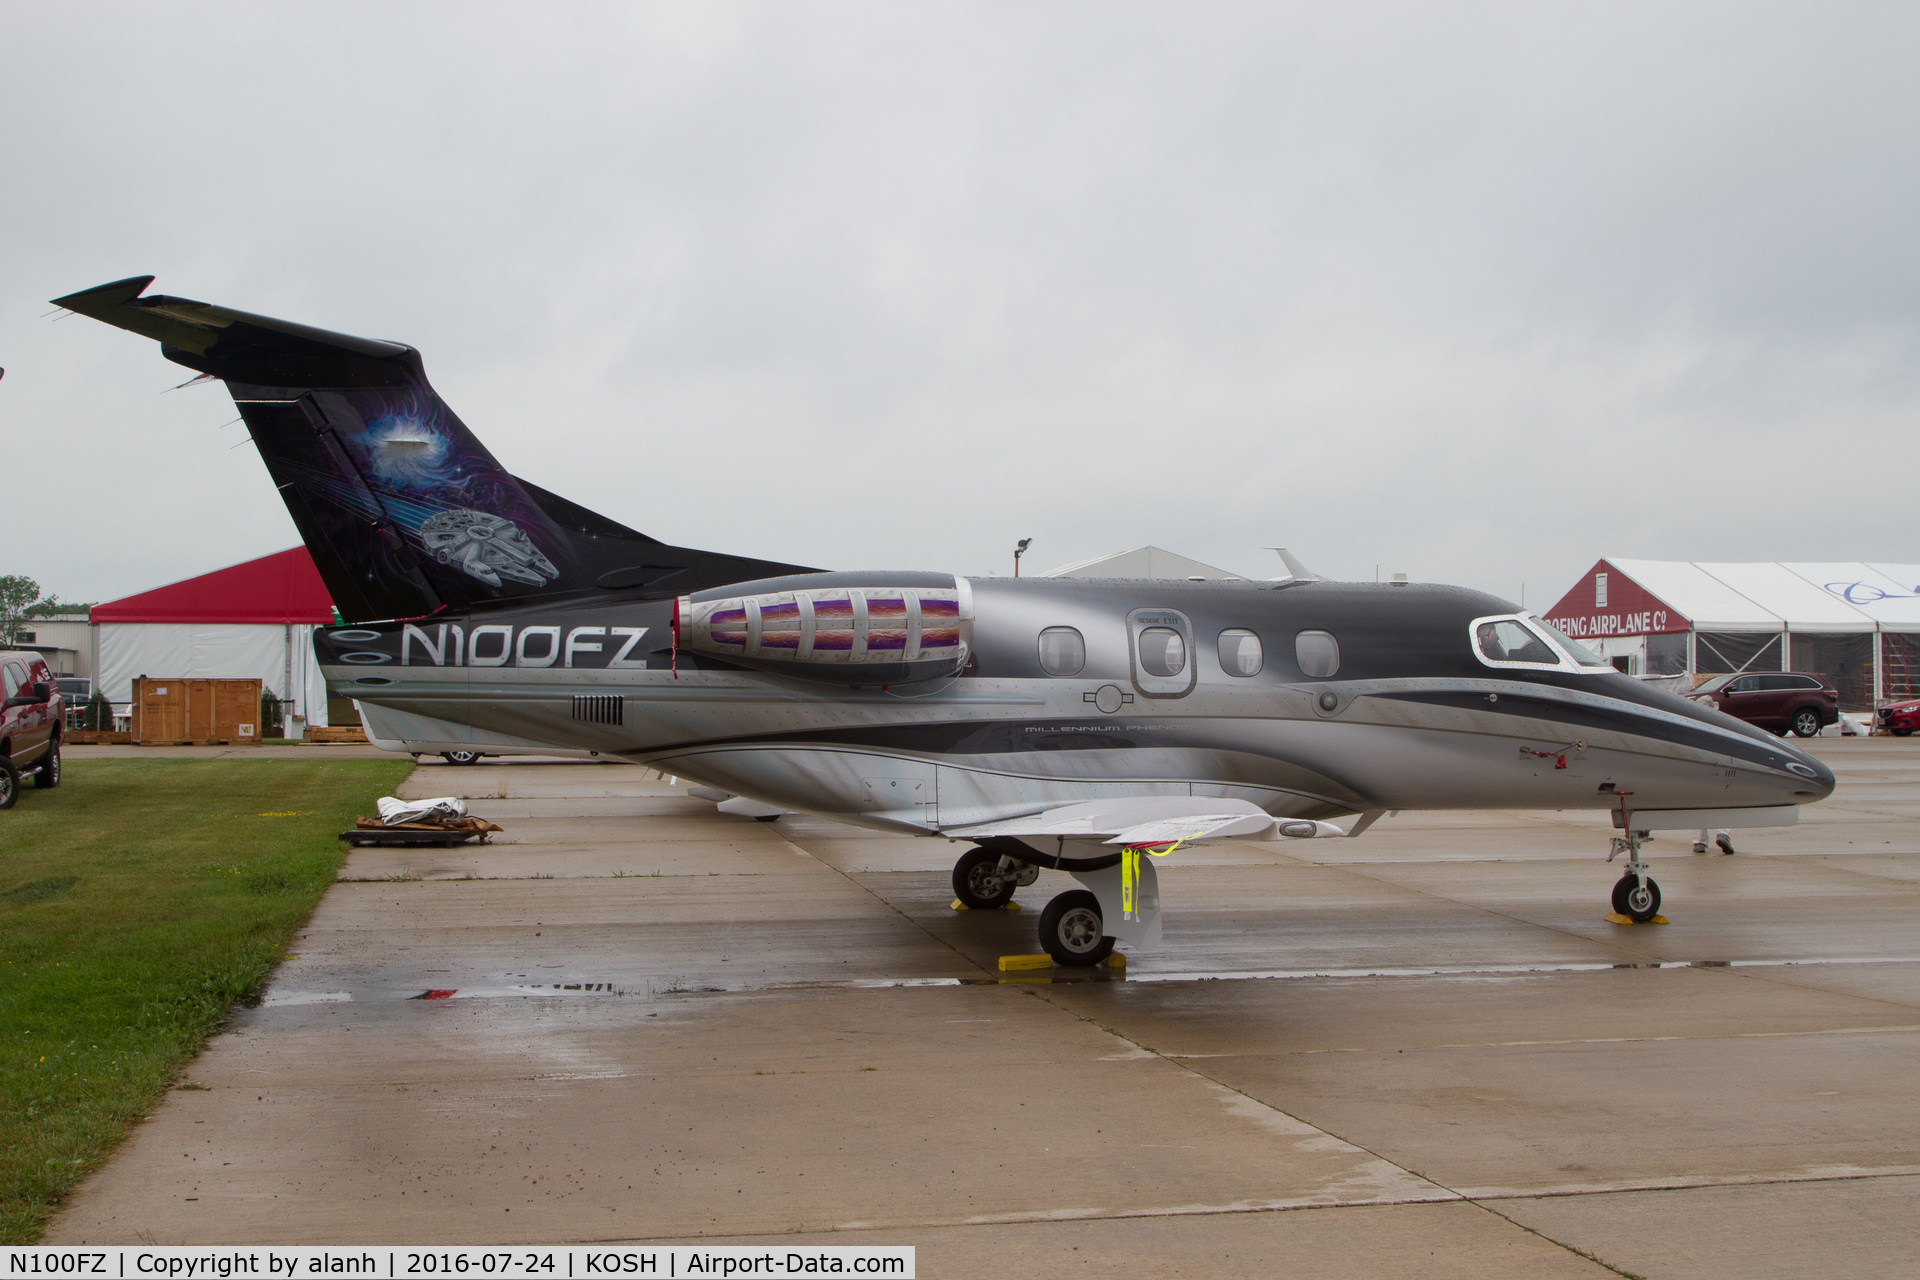 N100FZ, 2010 Embraer EMB-500 Phenom 100 C/N 50000137, At Airventure 2016 with a Star Wars custom paint job and Millenium Phenom titles